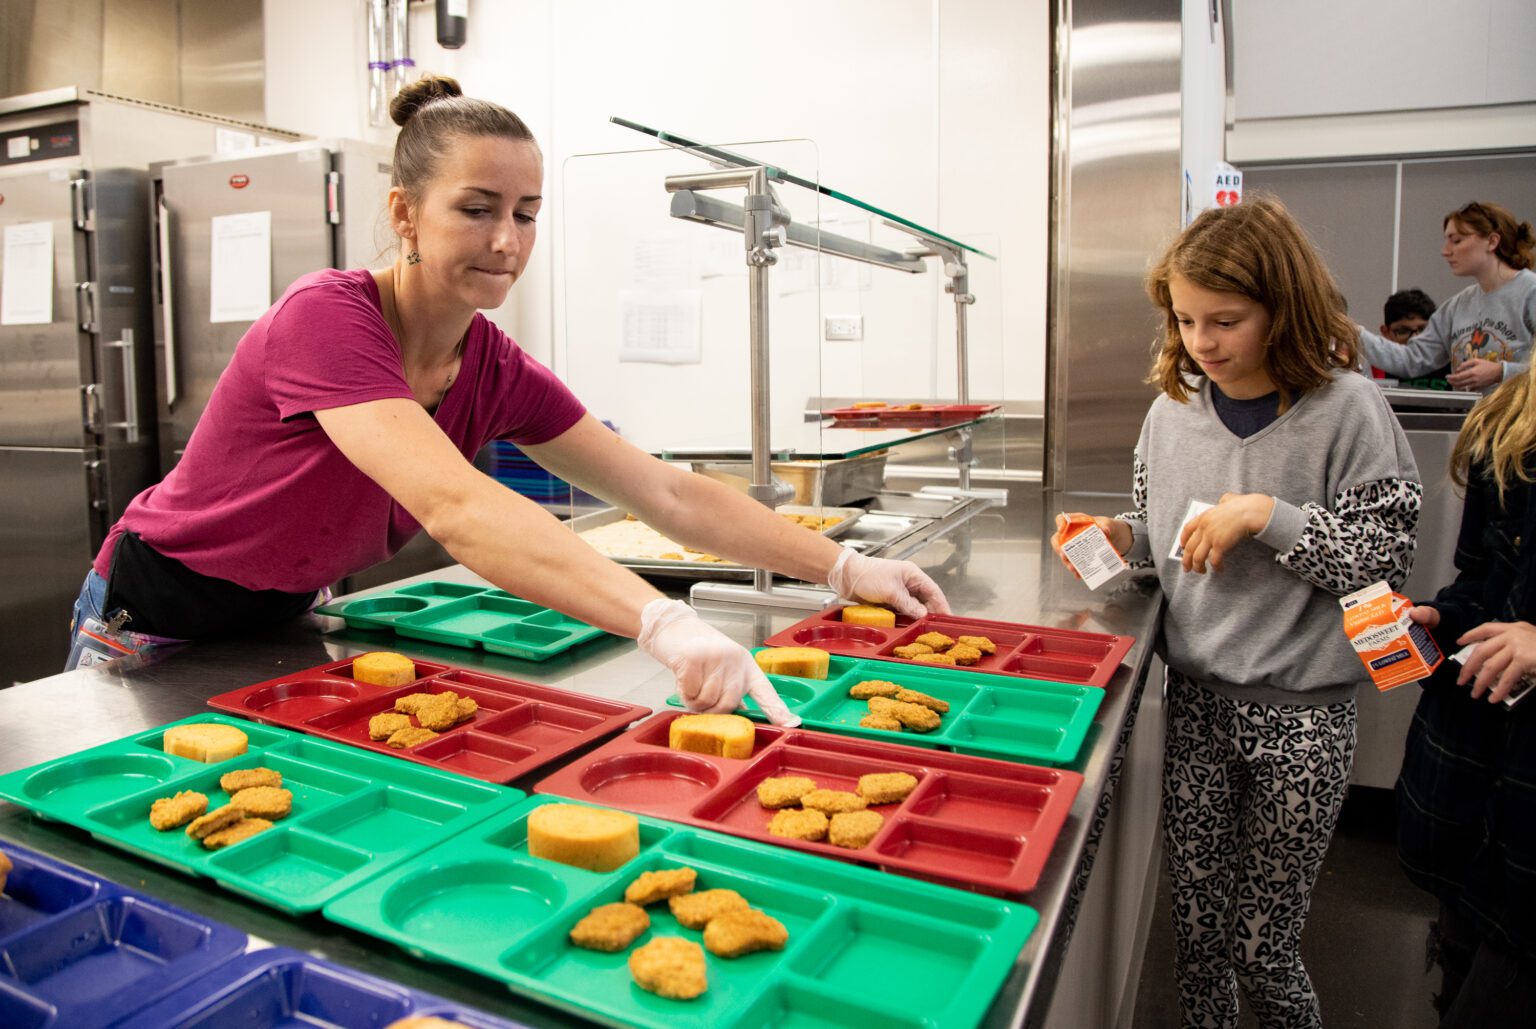 Food service assistant Jessica Johnson hands out trays of chicken nuggets and garlic bread for students at Alderwood Elementary School on Oct. 17. All students at Alderwood and at 13 other Bellingham schools receive free lunches under the Community Eligibility Provision through the USDA.